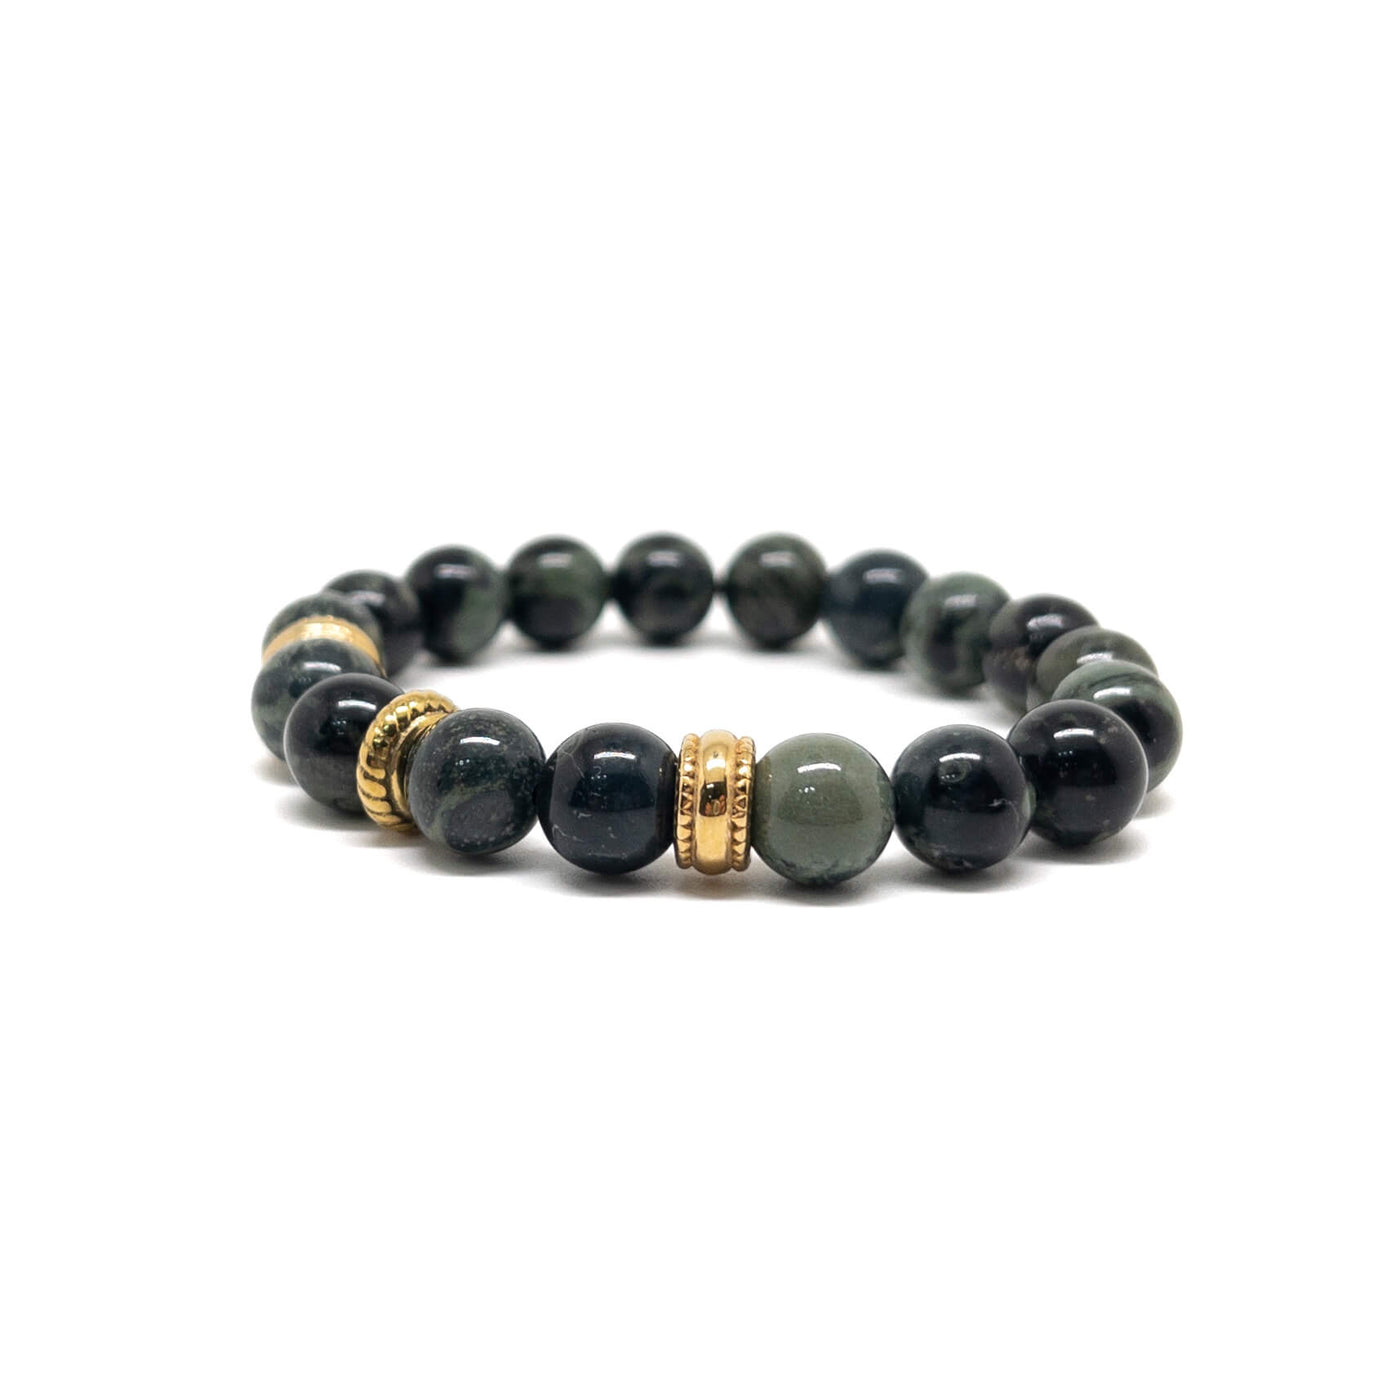 The Kambaba and Gold Plated Spacers Bracelet